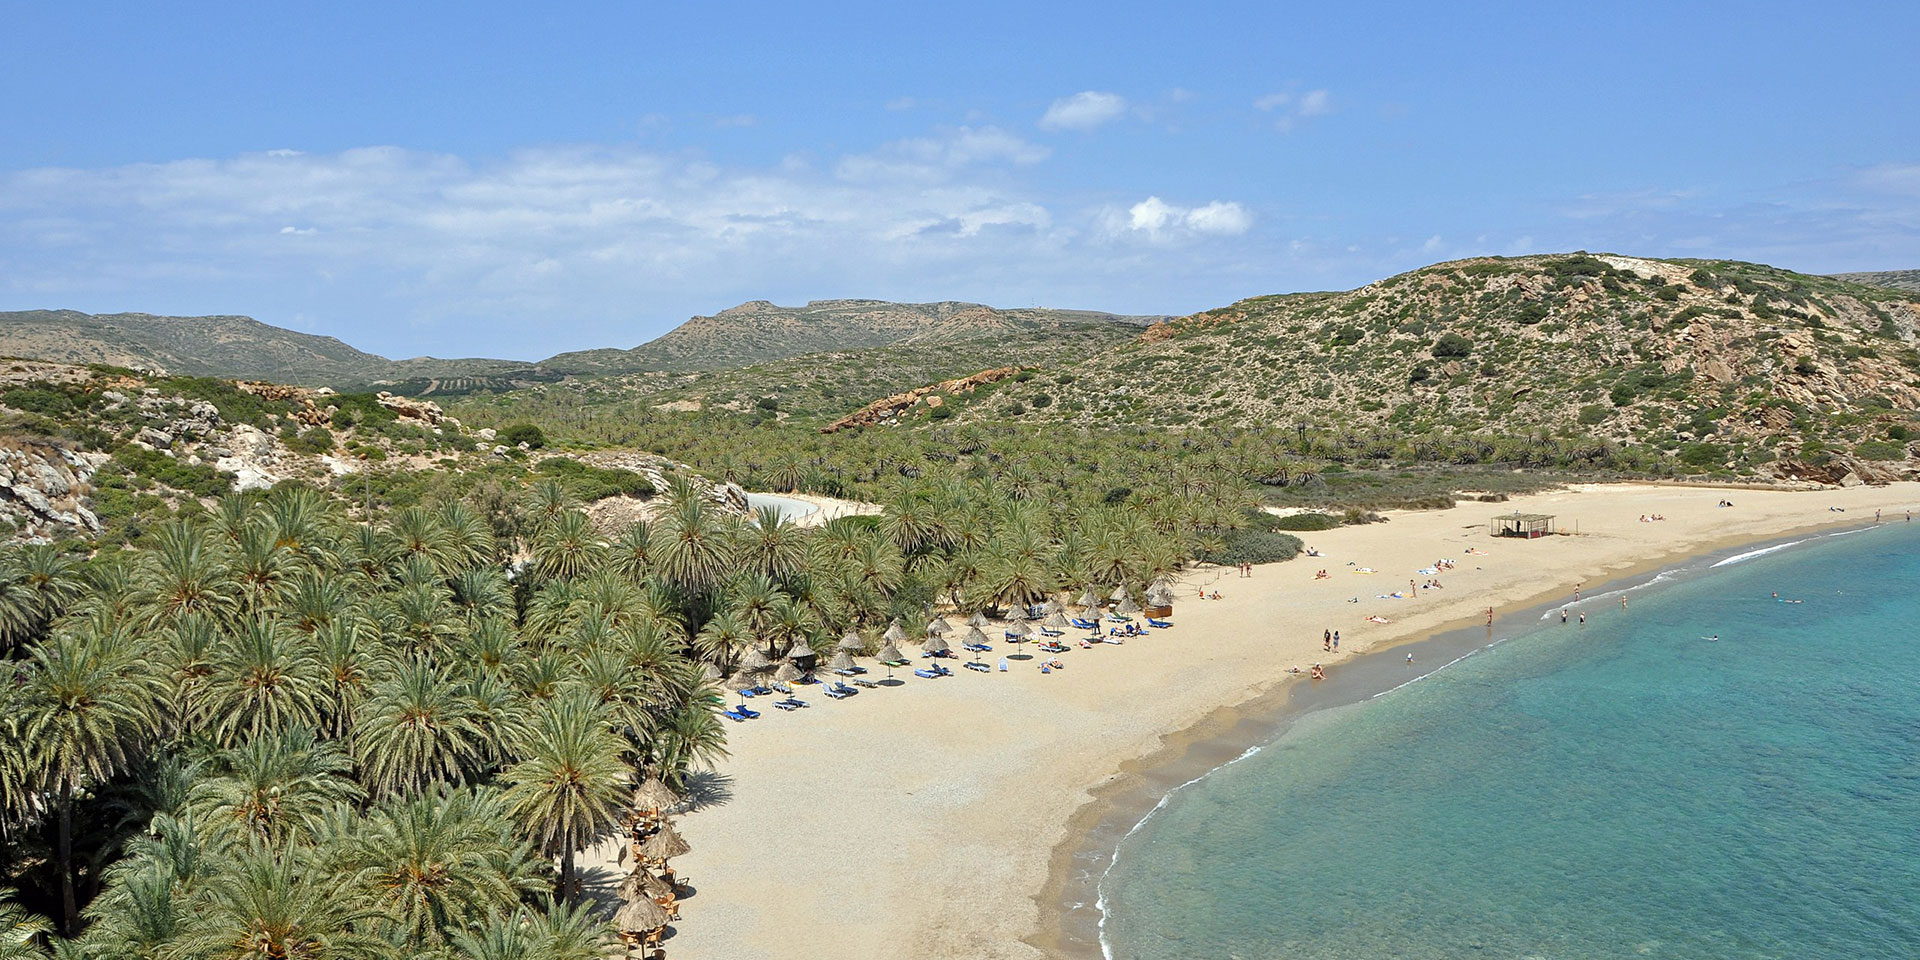 Rent your holidays car in Crete with Alianthos Cars